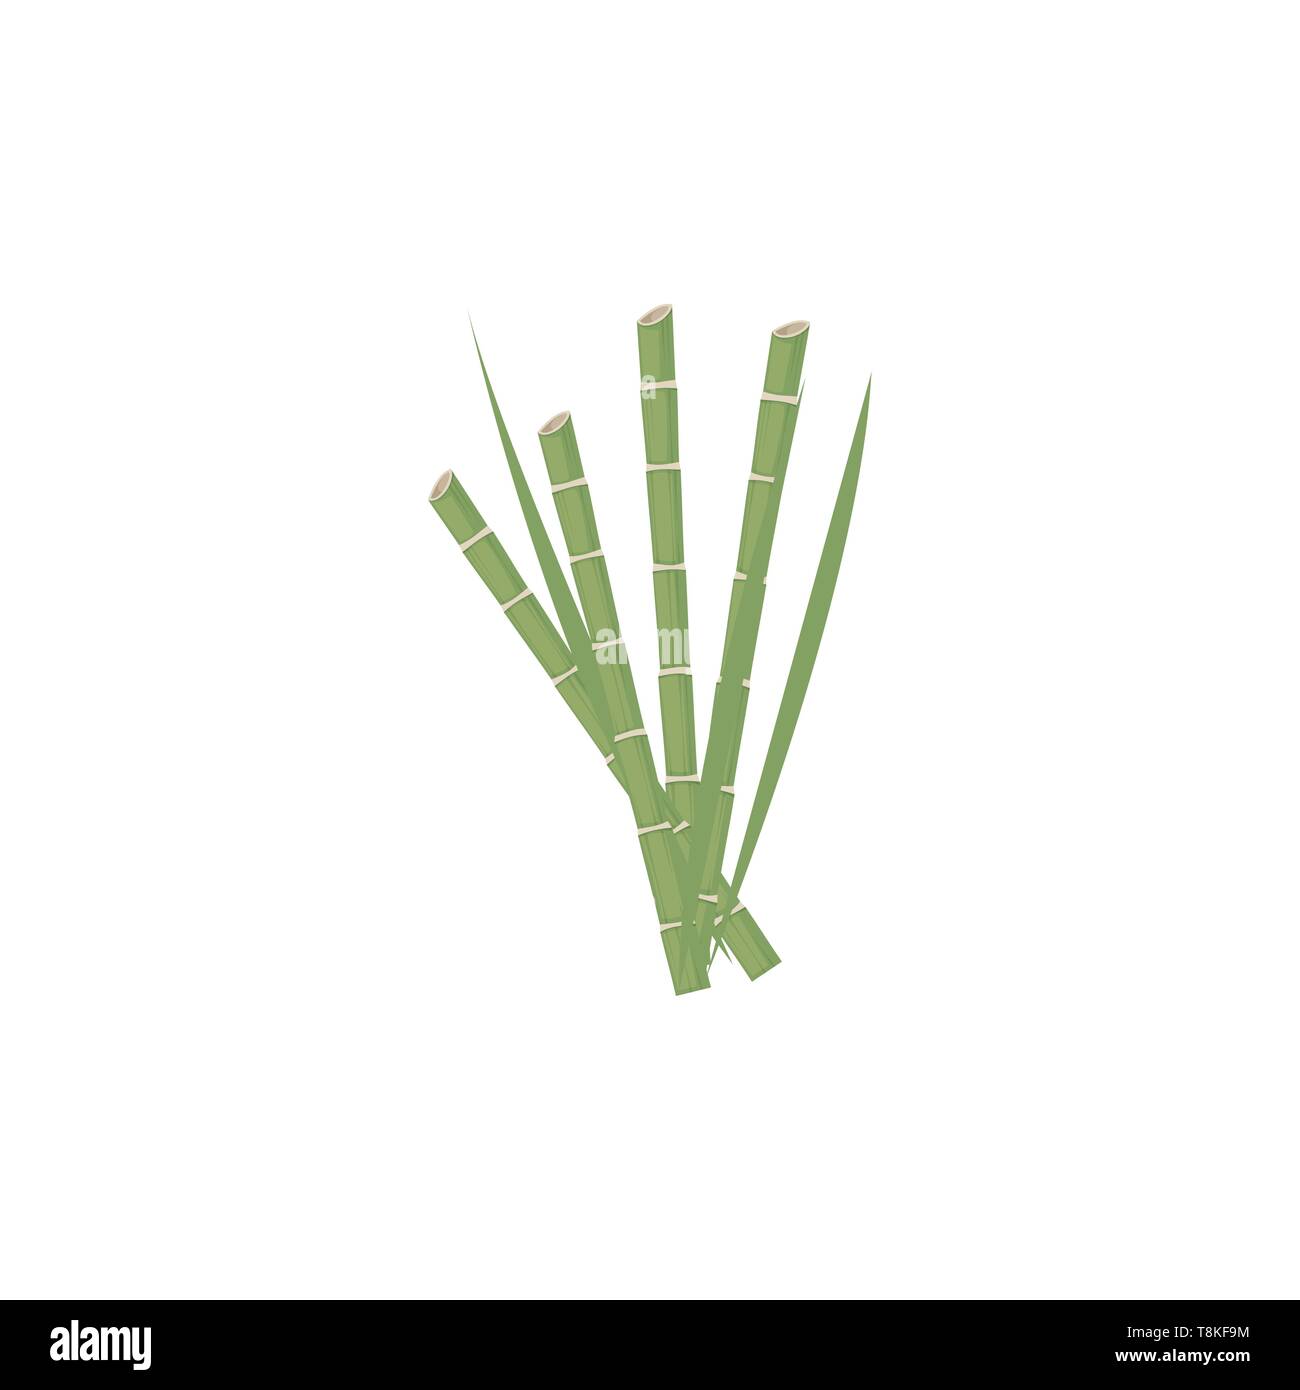 It is a tall tropical grass with hard, hollow stems, used to make furniture and fences., vector, color drawing or illustration. Stock Vector